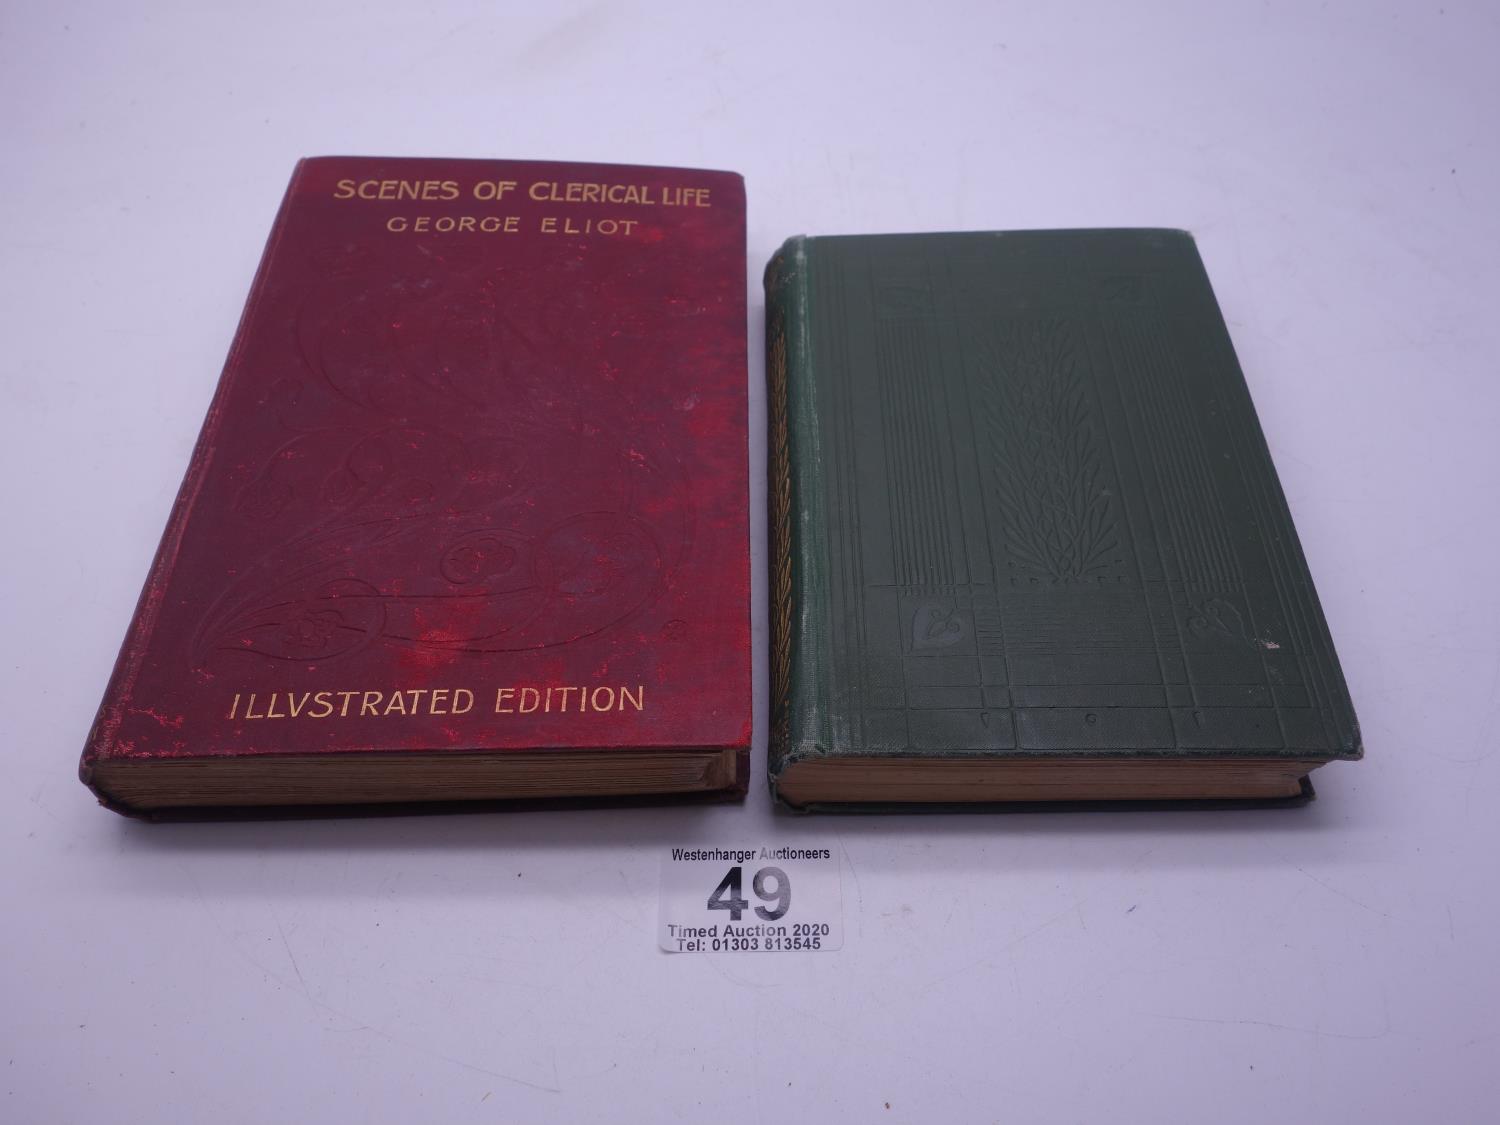 George Elliott, 1899 edition Scenes of Clerical Life, illustrated edition and a hard bound copy of - Image 11 of 14